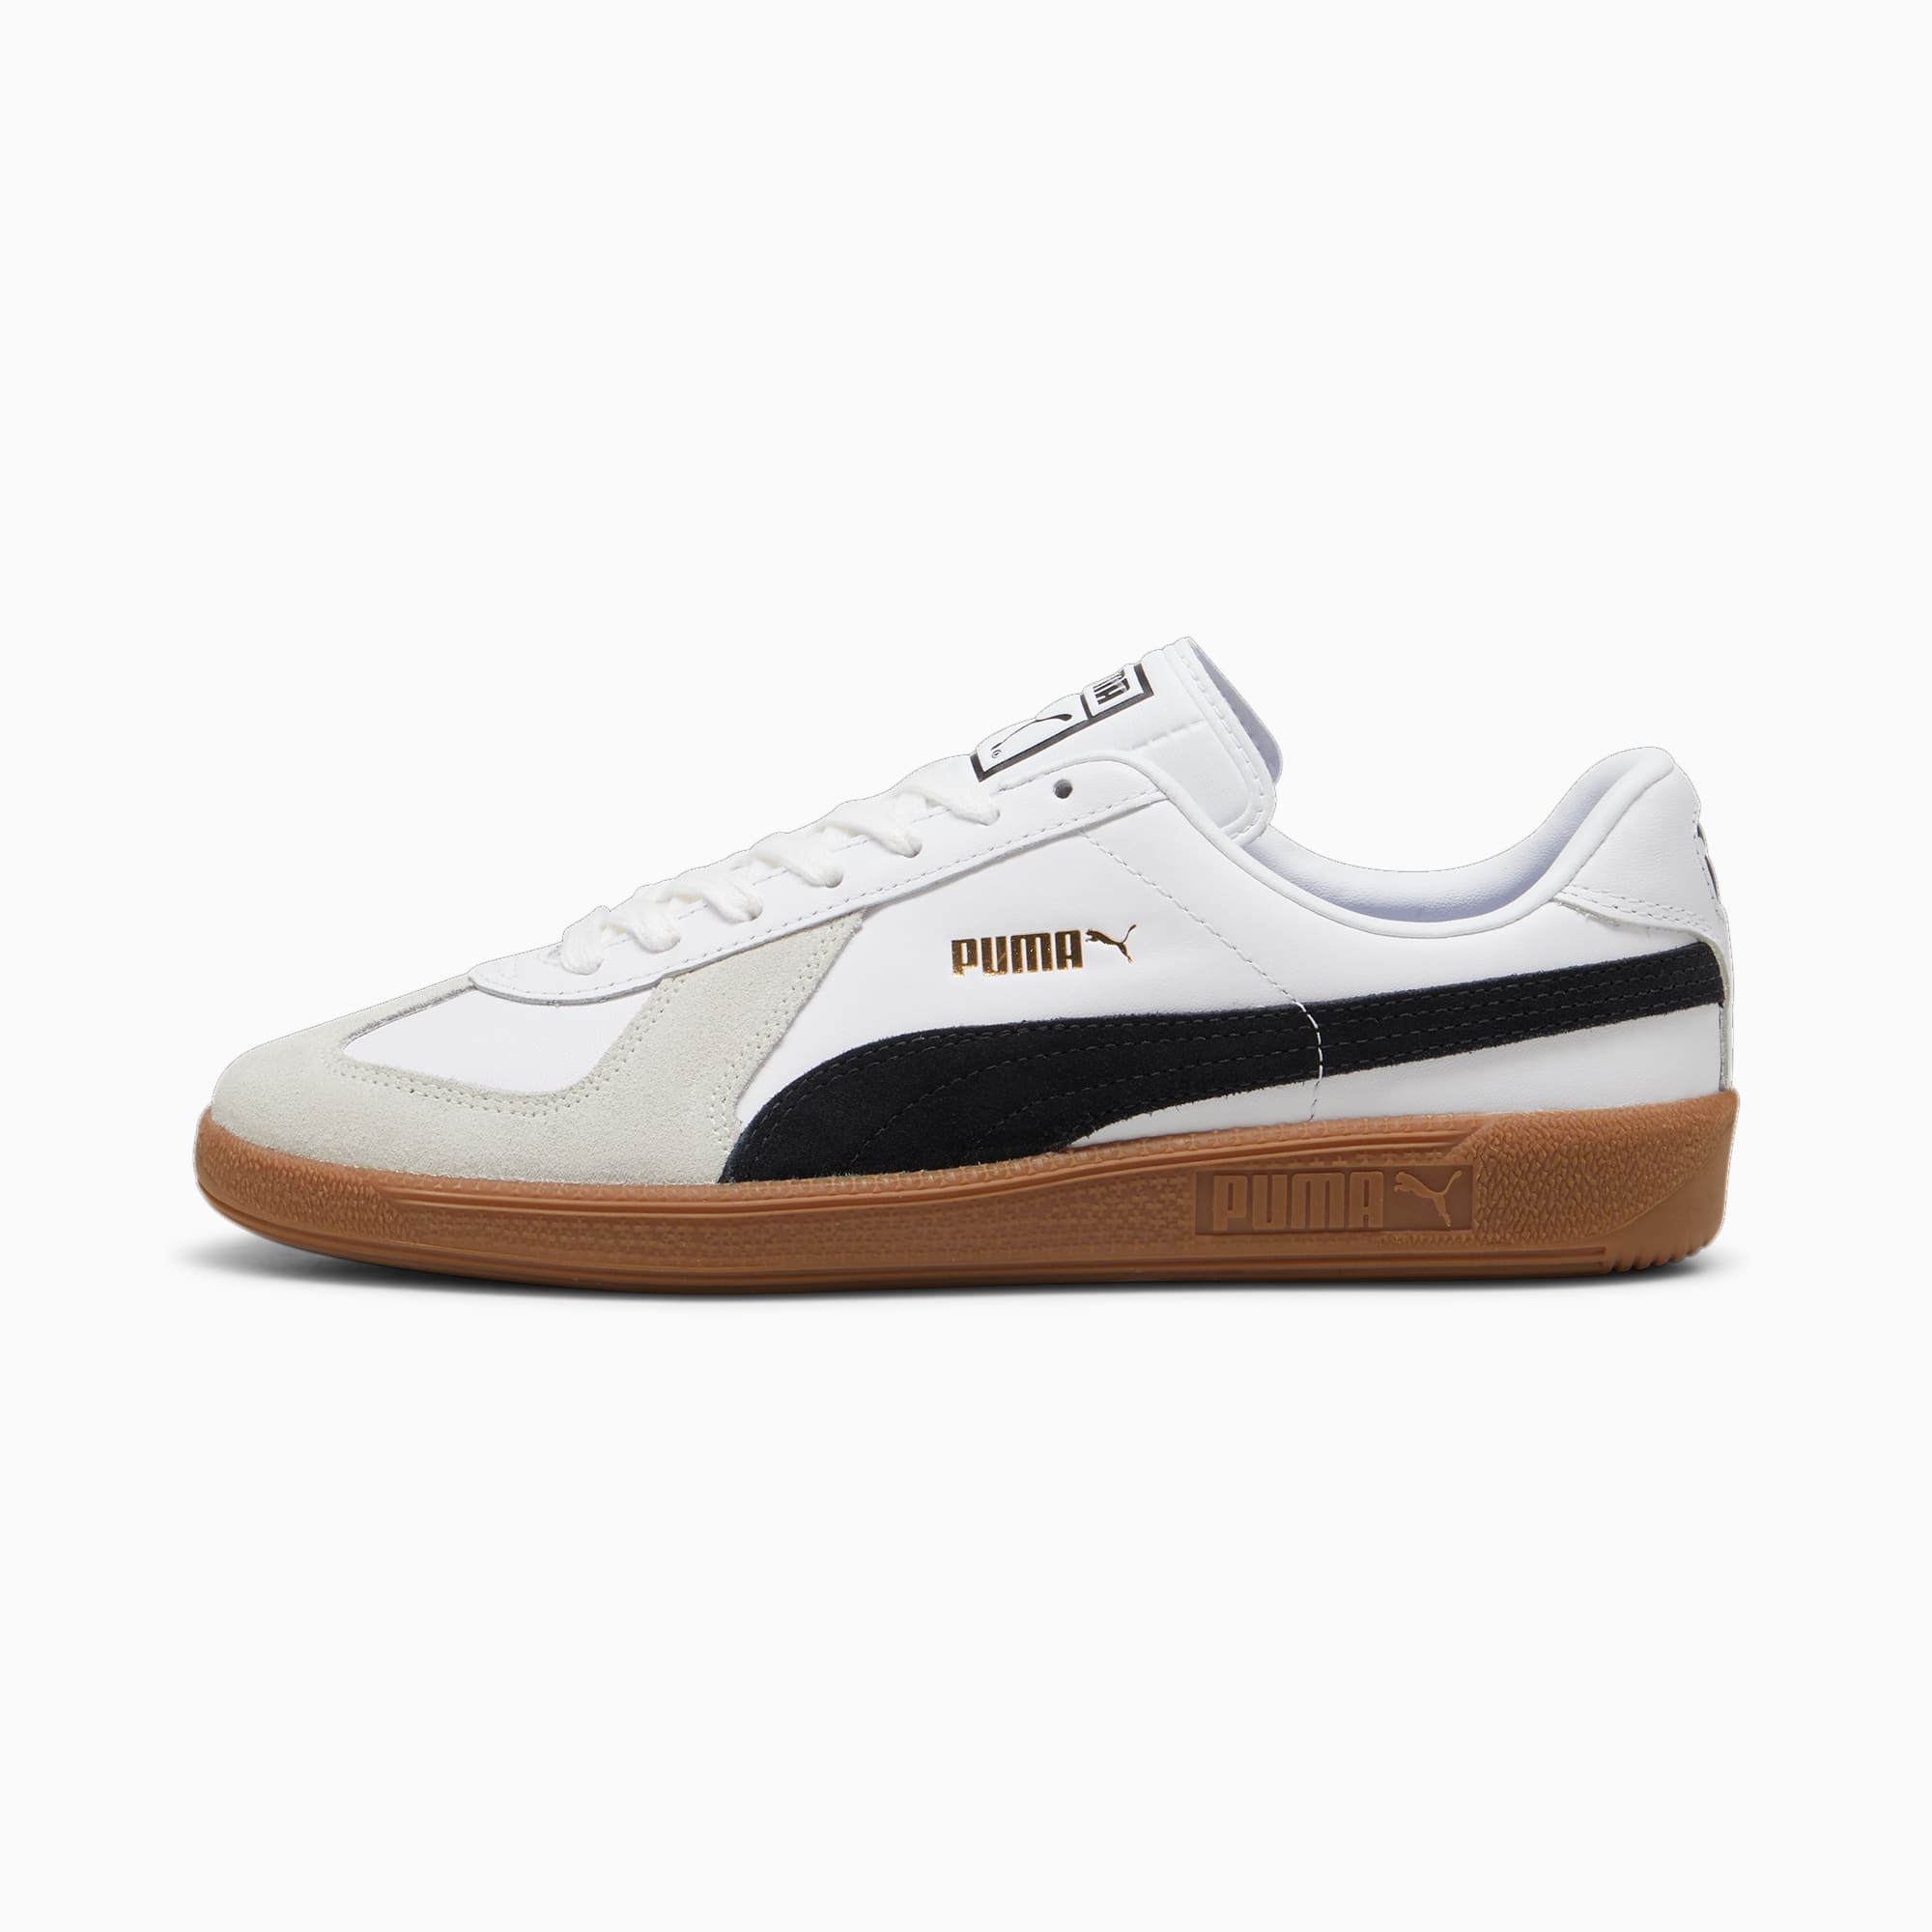 Women's PUMA Army Trainer Sneakers, White/Black/Gum, Size 35,5, Shoes